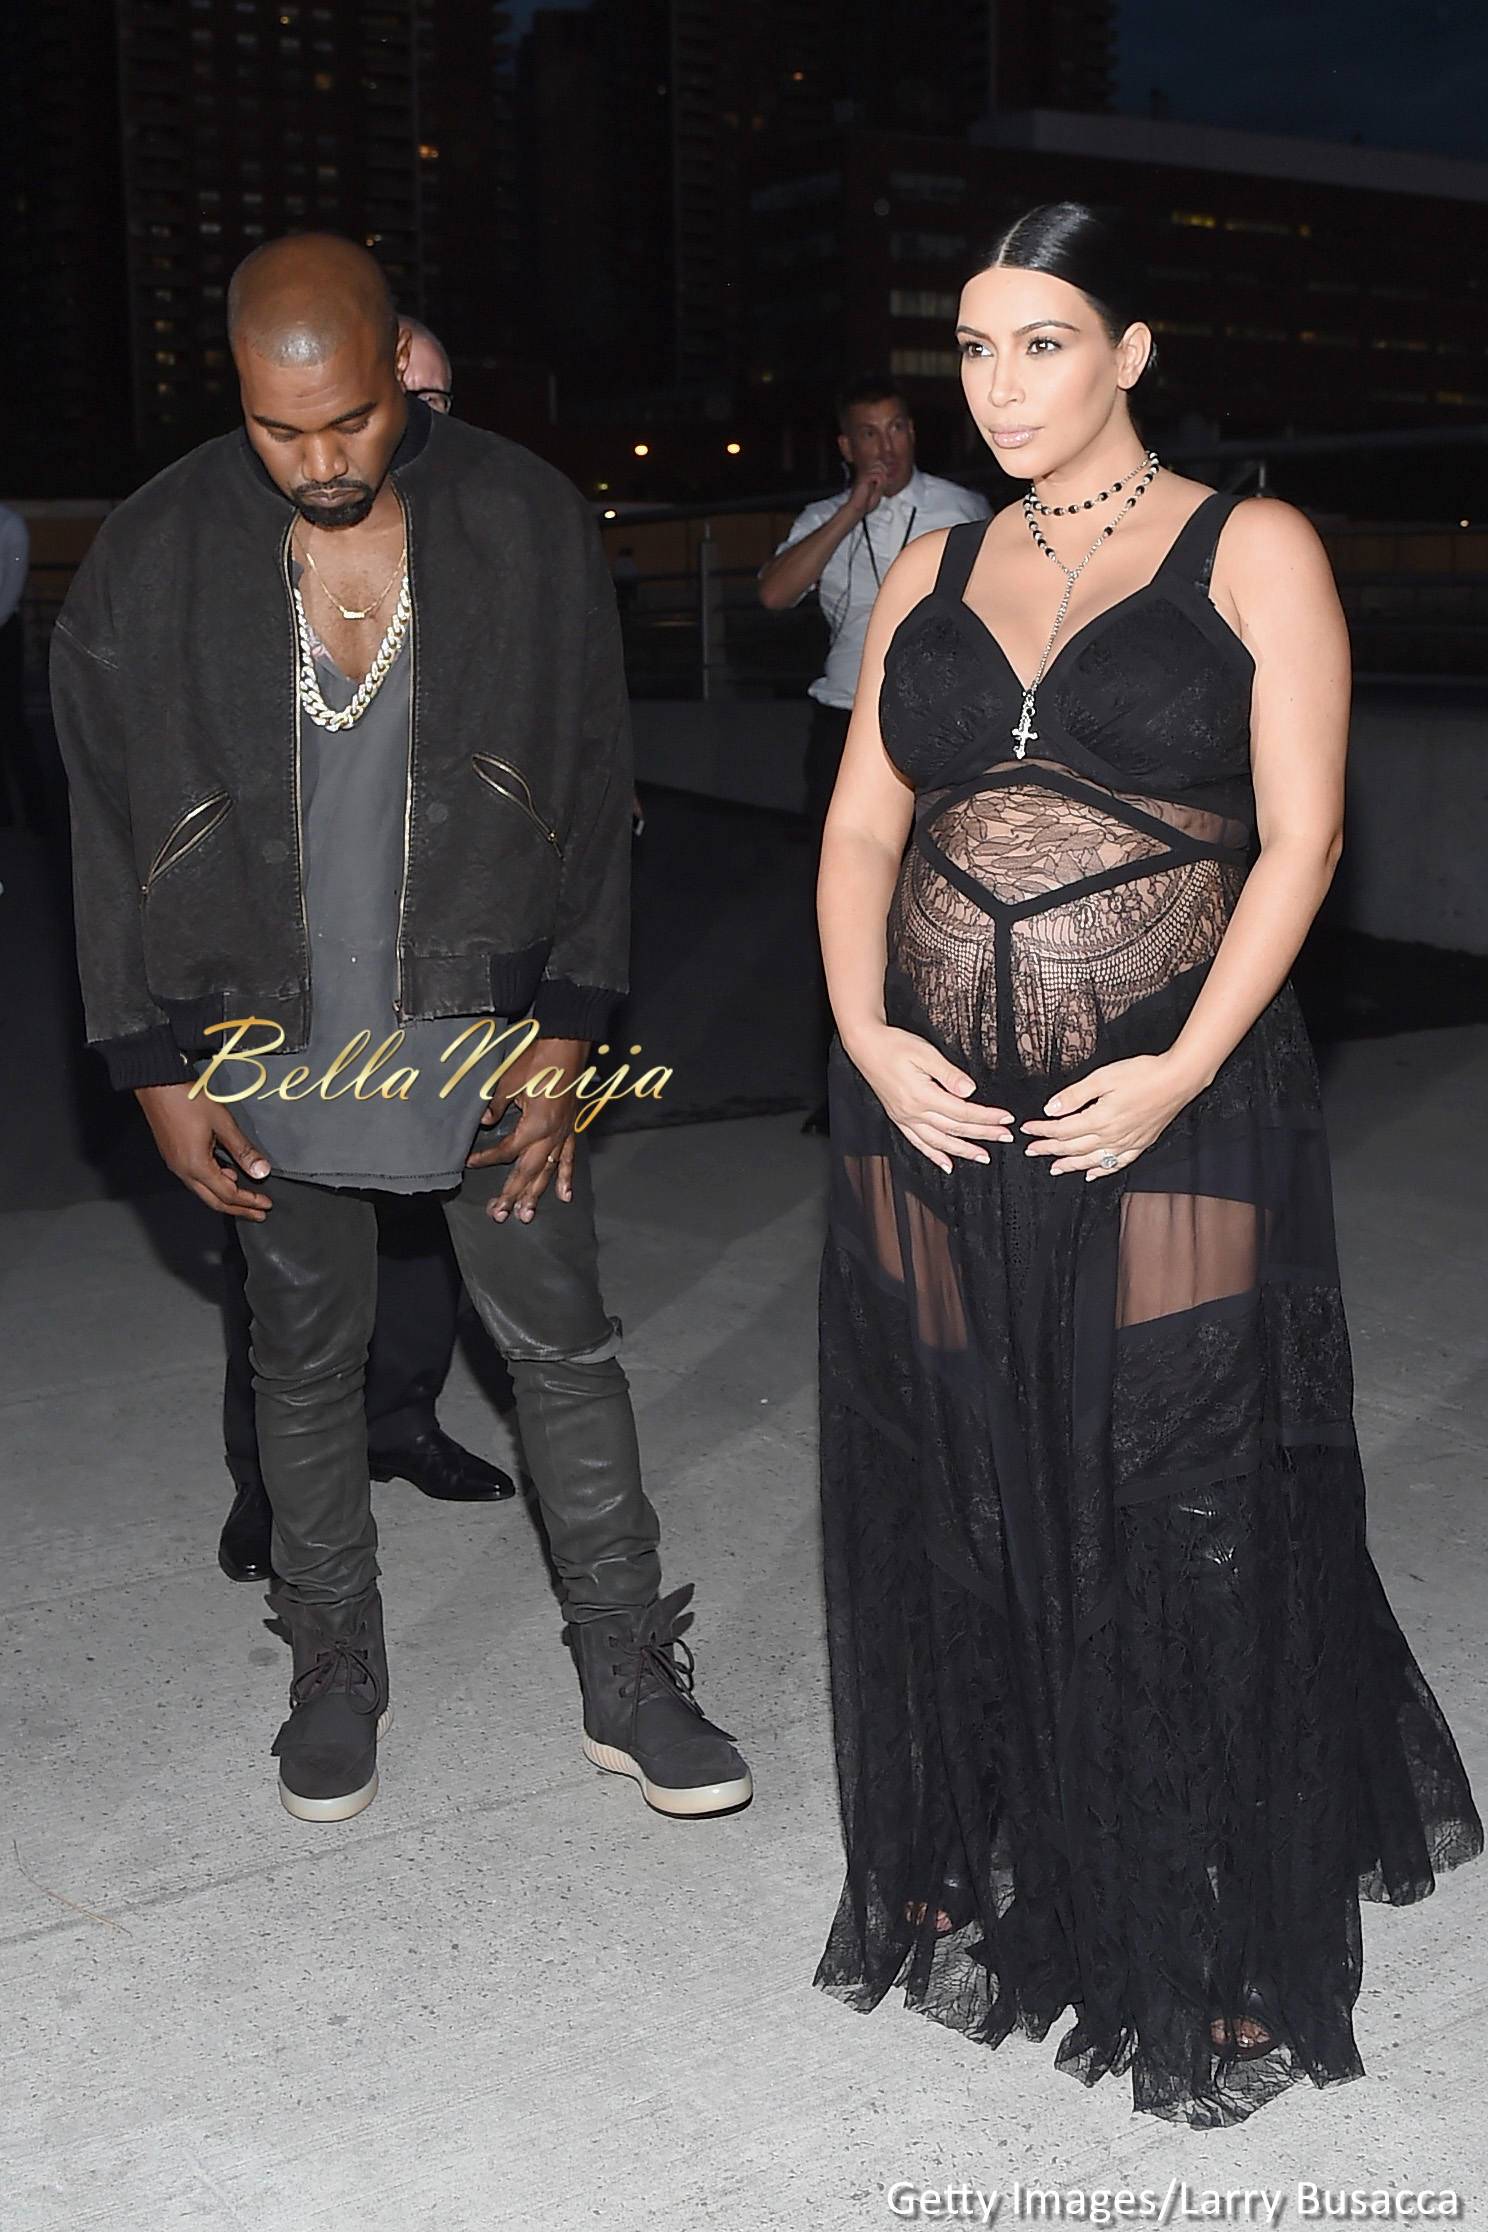 Her Most Daring Pregnancy Look? Check Out Kim Kardashian's Outfit to the Givenchy Show ...